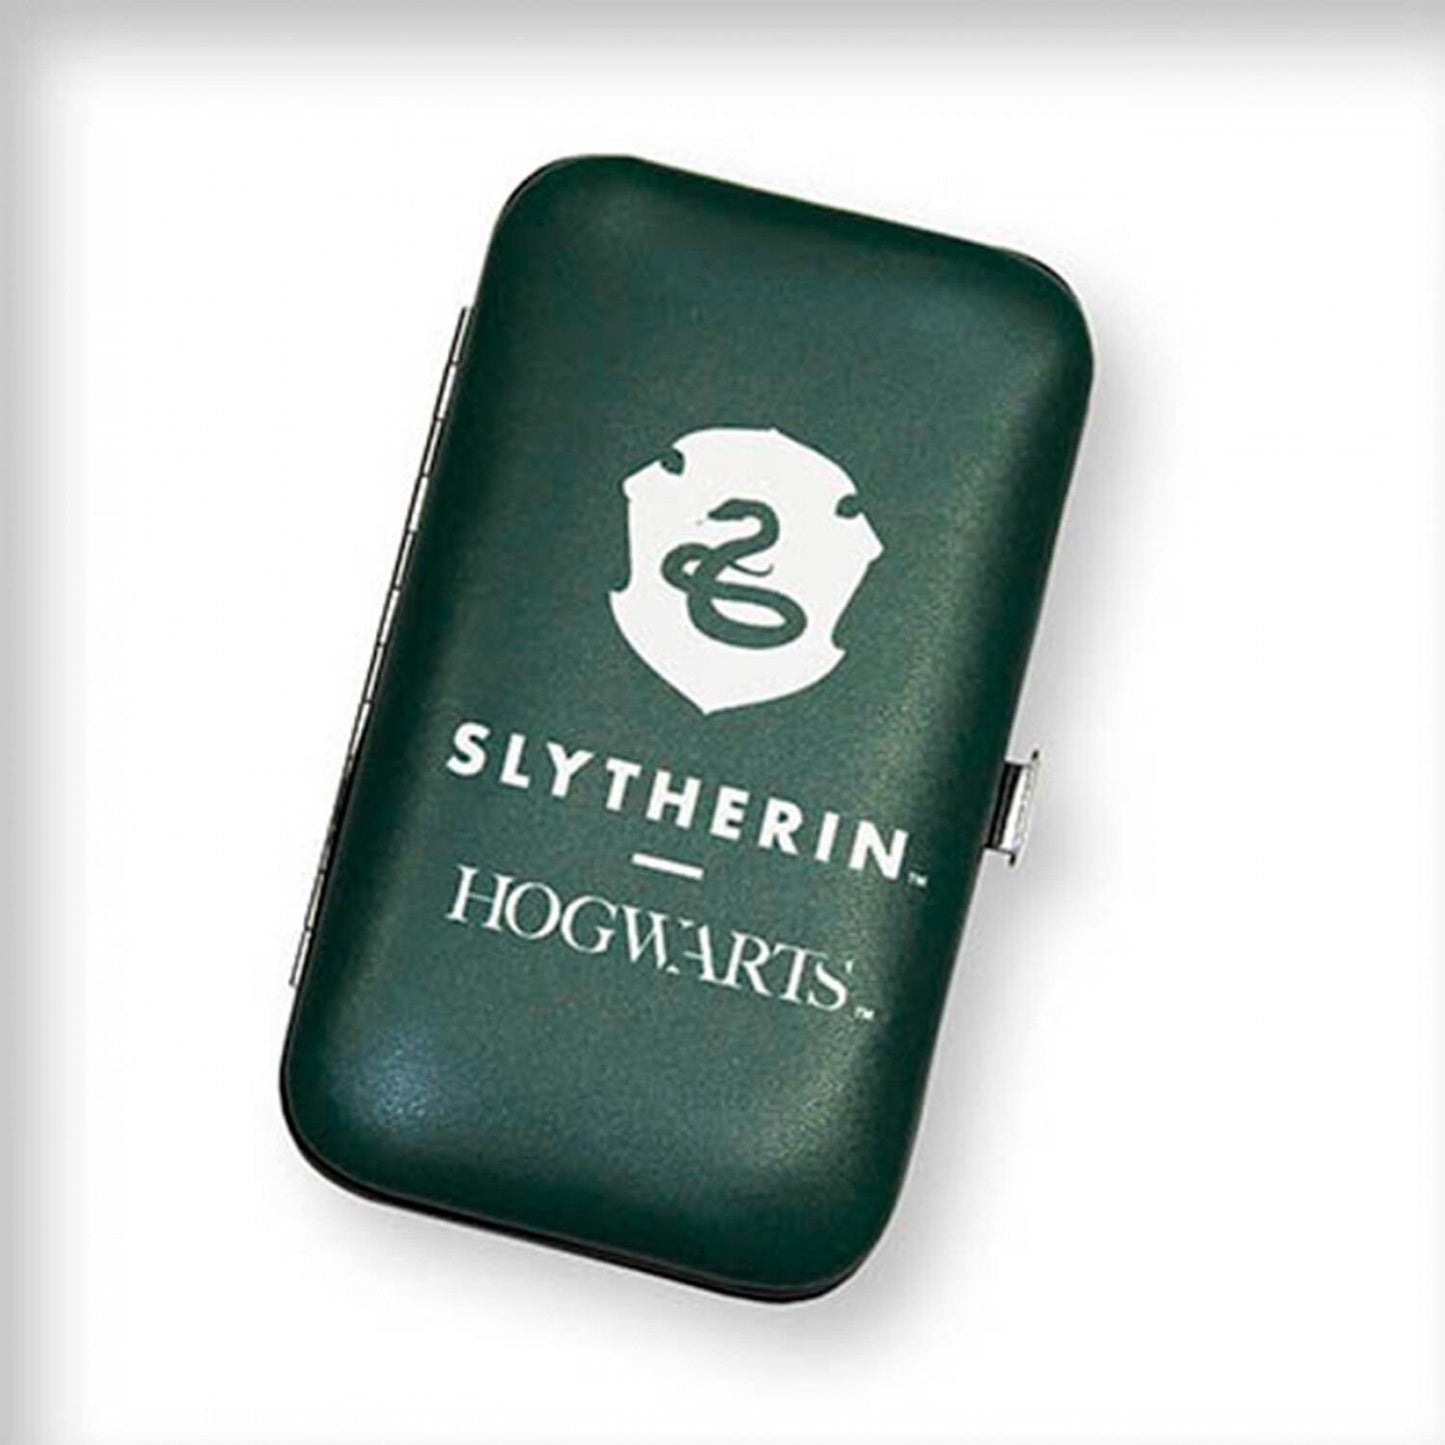 Harry Potter Licensed Notions Slytherin CN23402009 Traveling Sewing Tools 2.75" x 4.75"